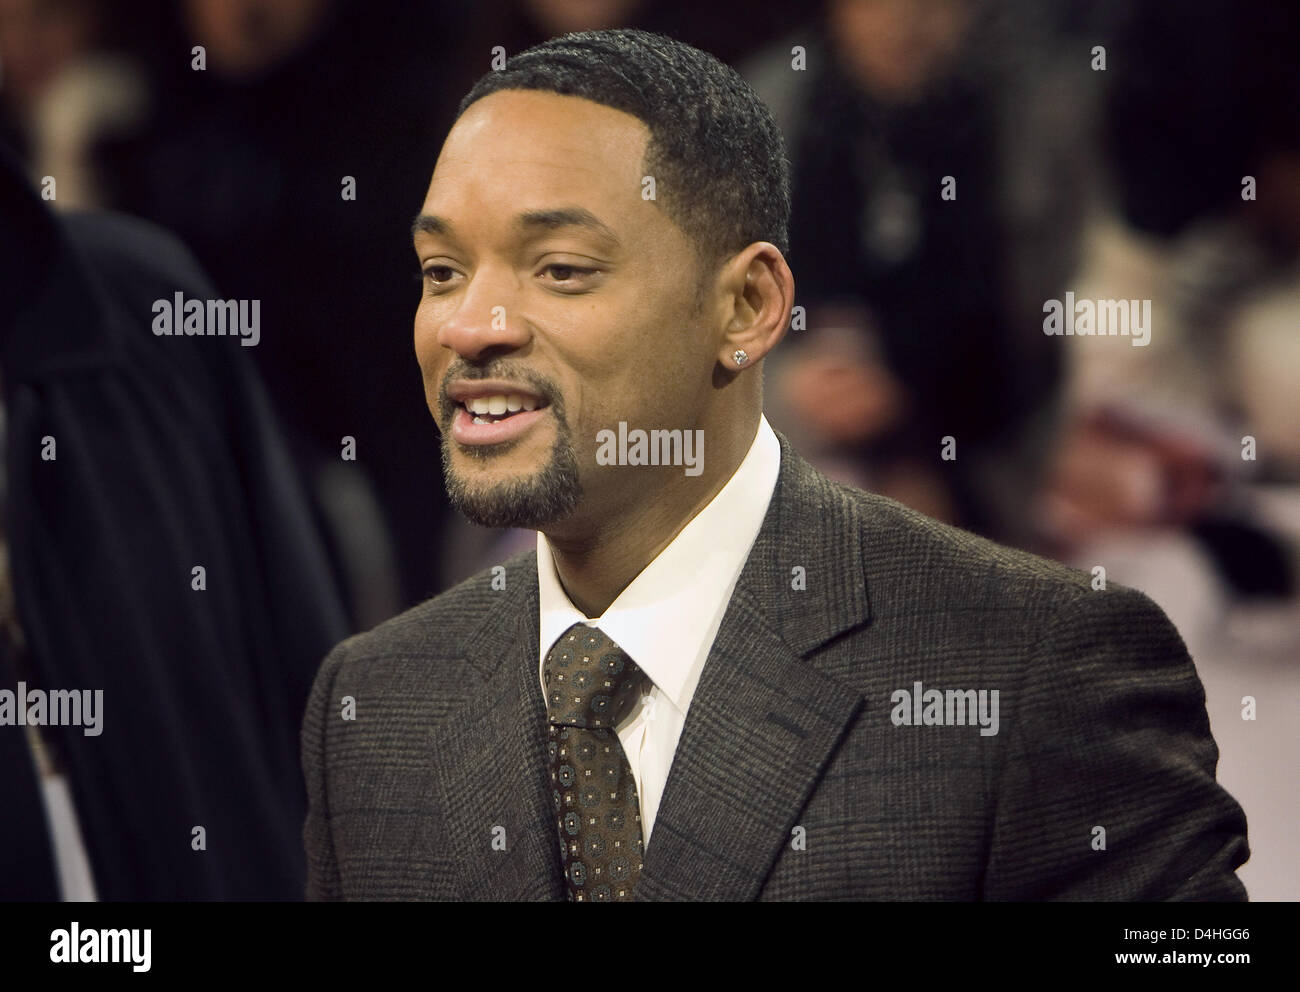 US actor Will Smith arrives for the Germany premiere of his film ?Seven Pounds? at cinema ?CineStar? at Potsdam Square in Berlin, Germany, 06 January 2009. The film will be released at German theatres on 08 January. Photo: Arno Burgi Stock Photo